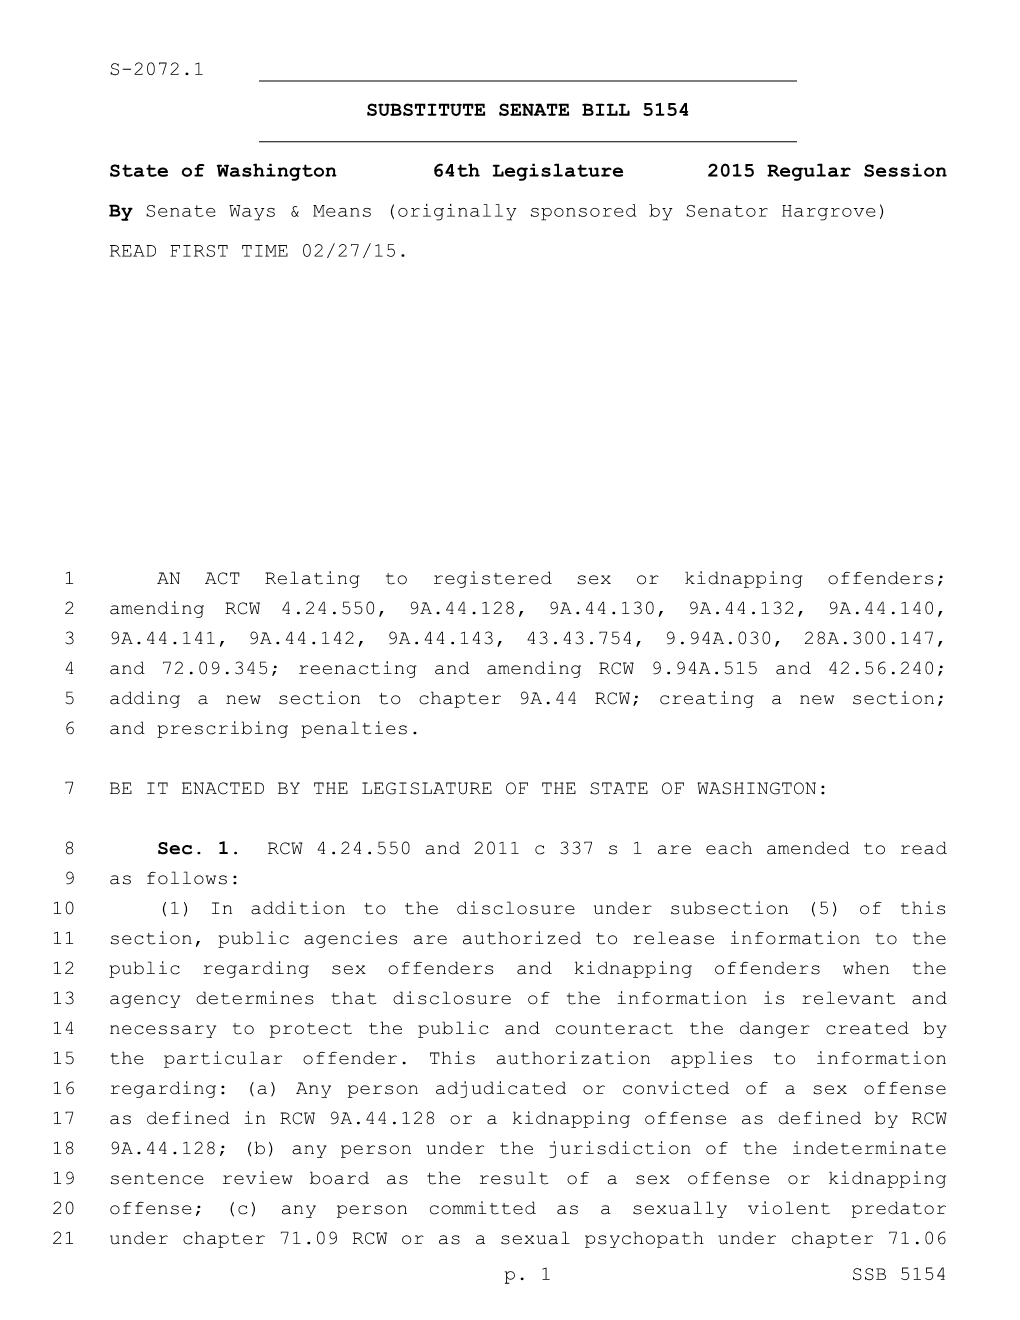 AN ACT Relating to Registered Sex Or Kidnapping Offenders; 1 Amending